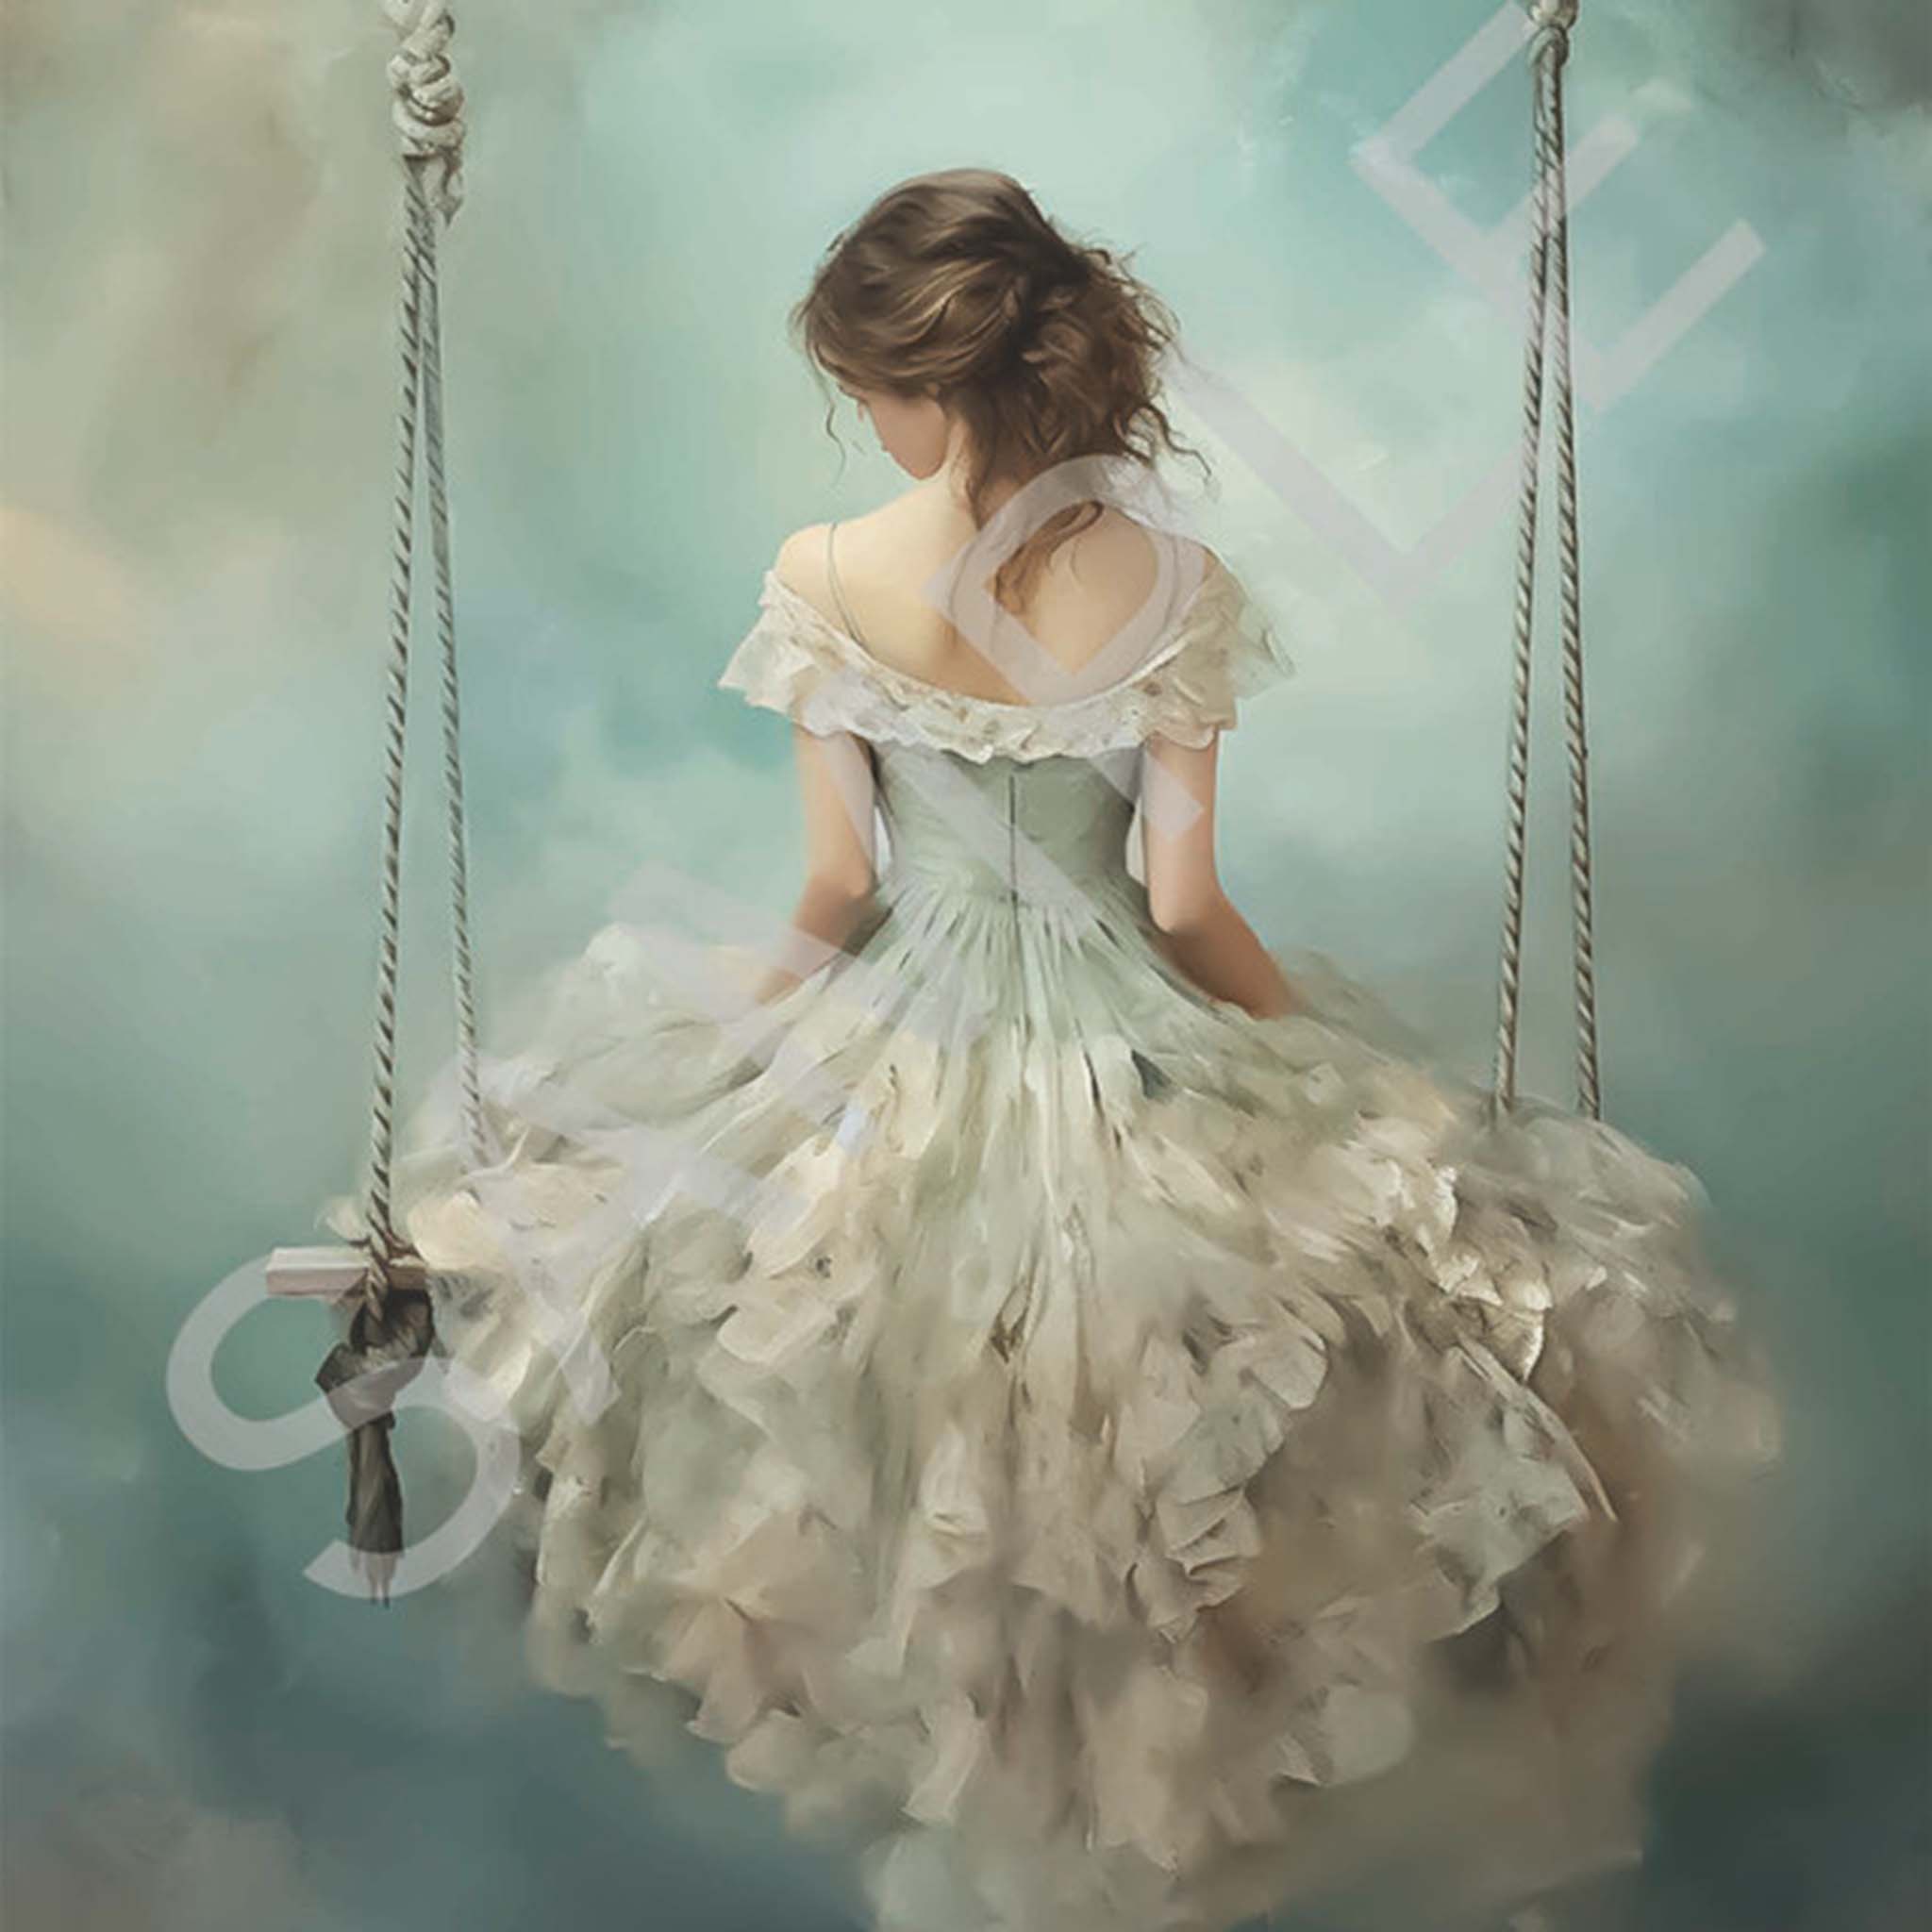 Close-up of an A4 rice paper design of a whimsical young woman wearing a cream and blue dress, perched upon a swing in front of a dreamy blue background.